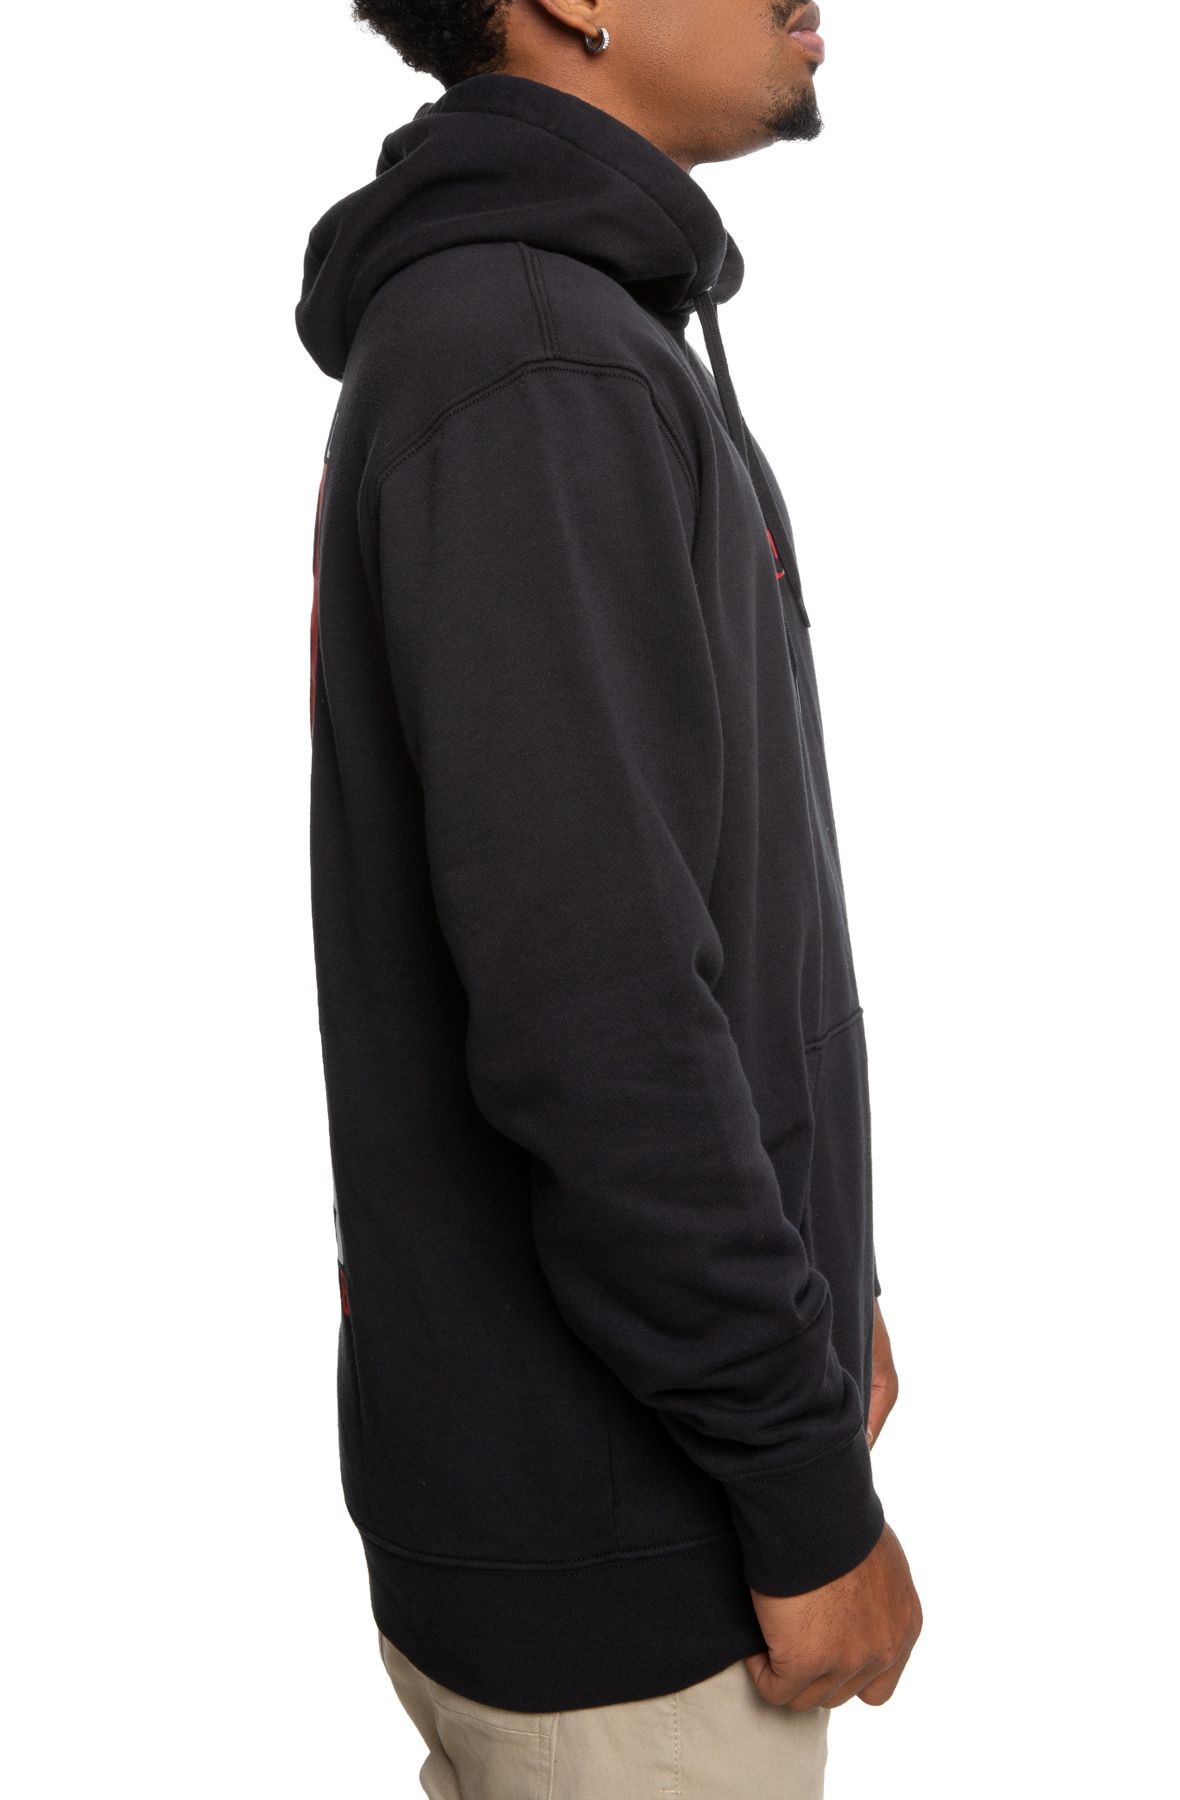 VANS New Stax Pullover Hoodie in VN0A49SHBLK - Shiekh